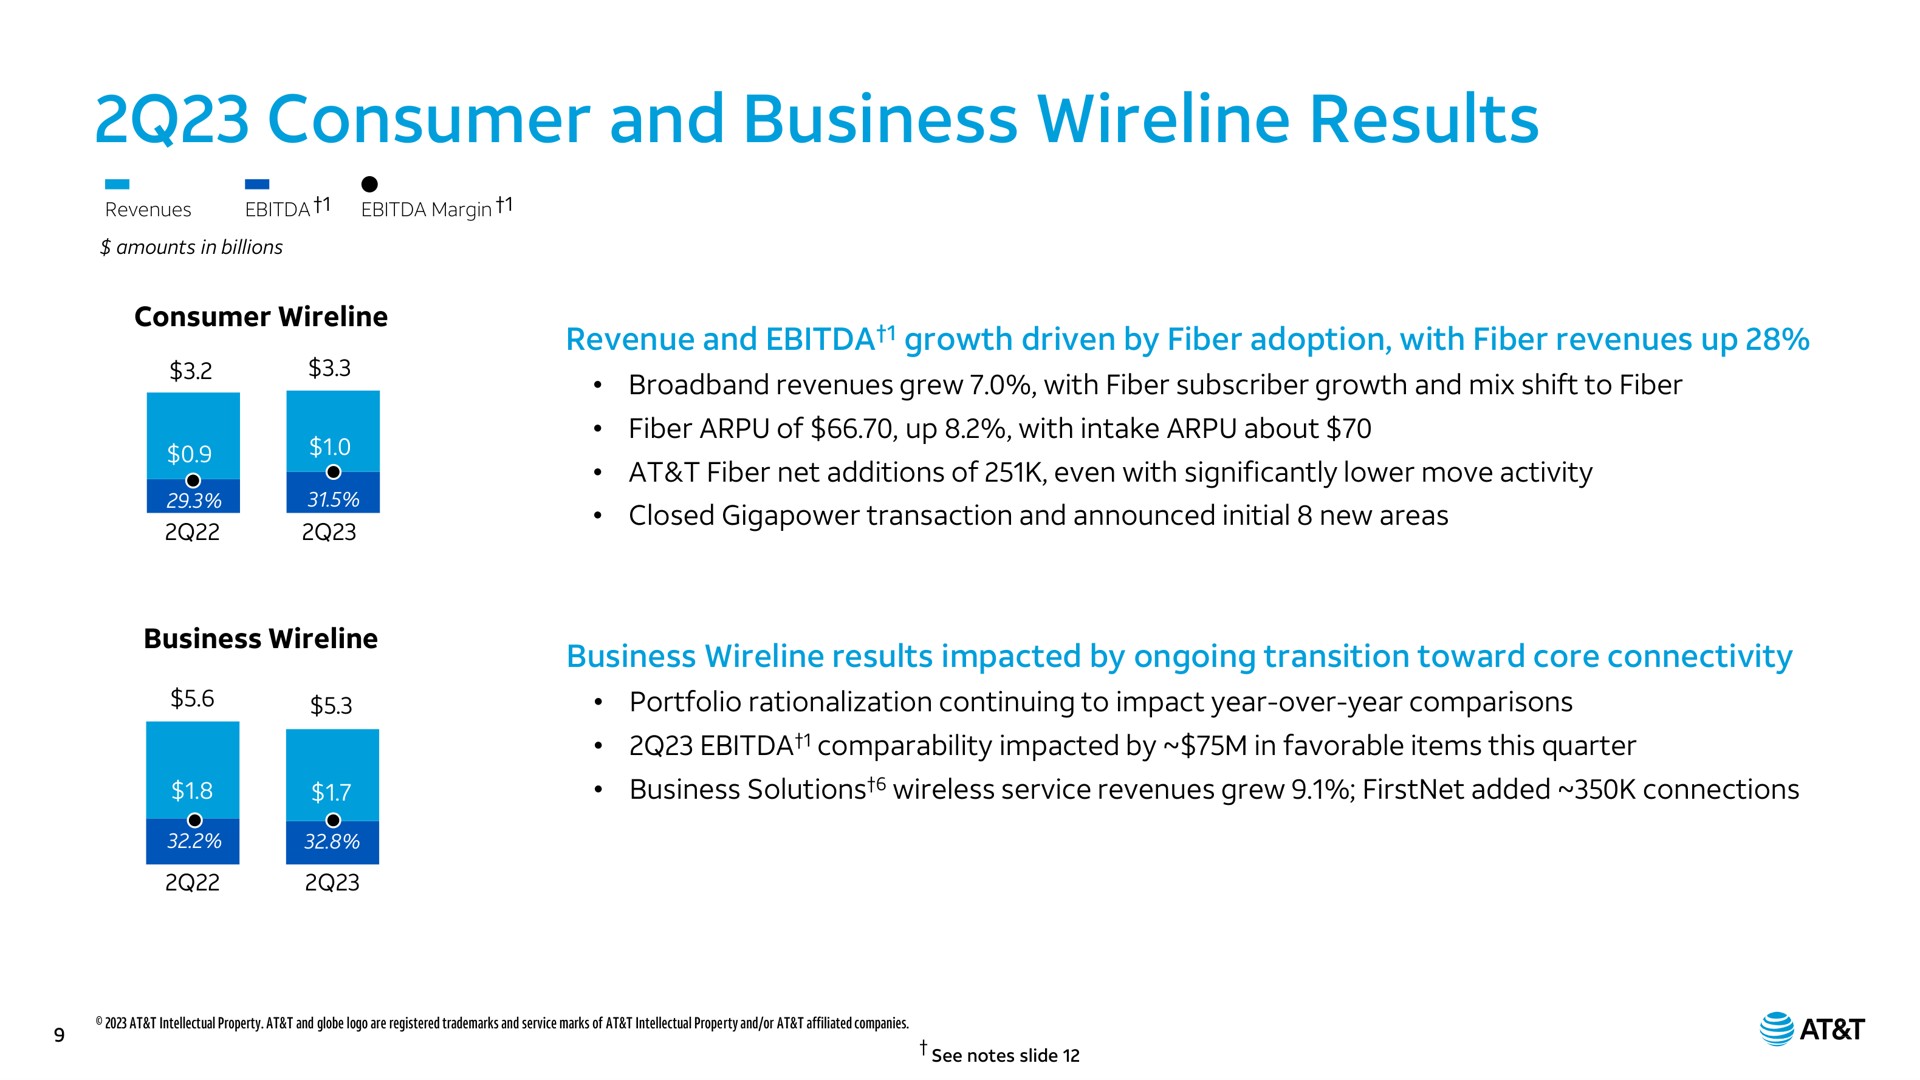 consumer and business results gap impacted by ongoing transition toward core connectivity | AT&T